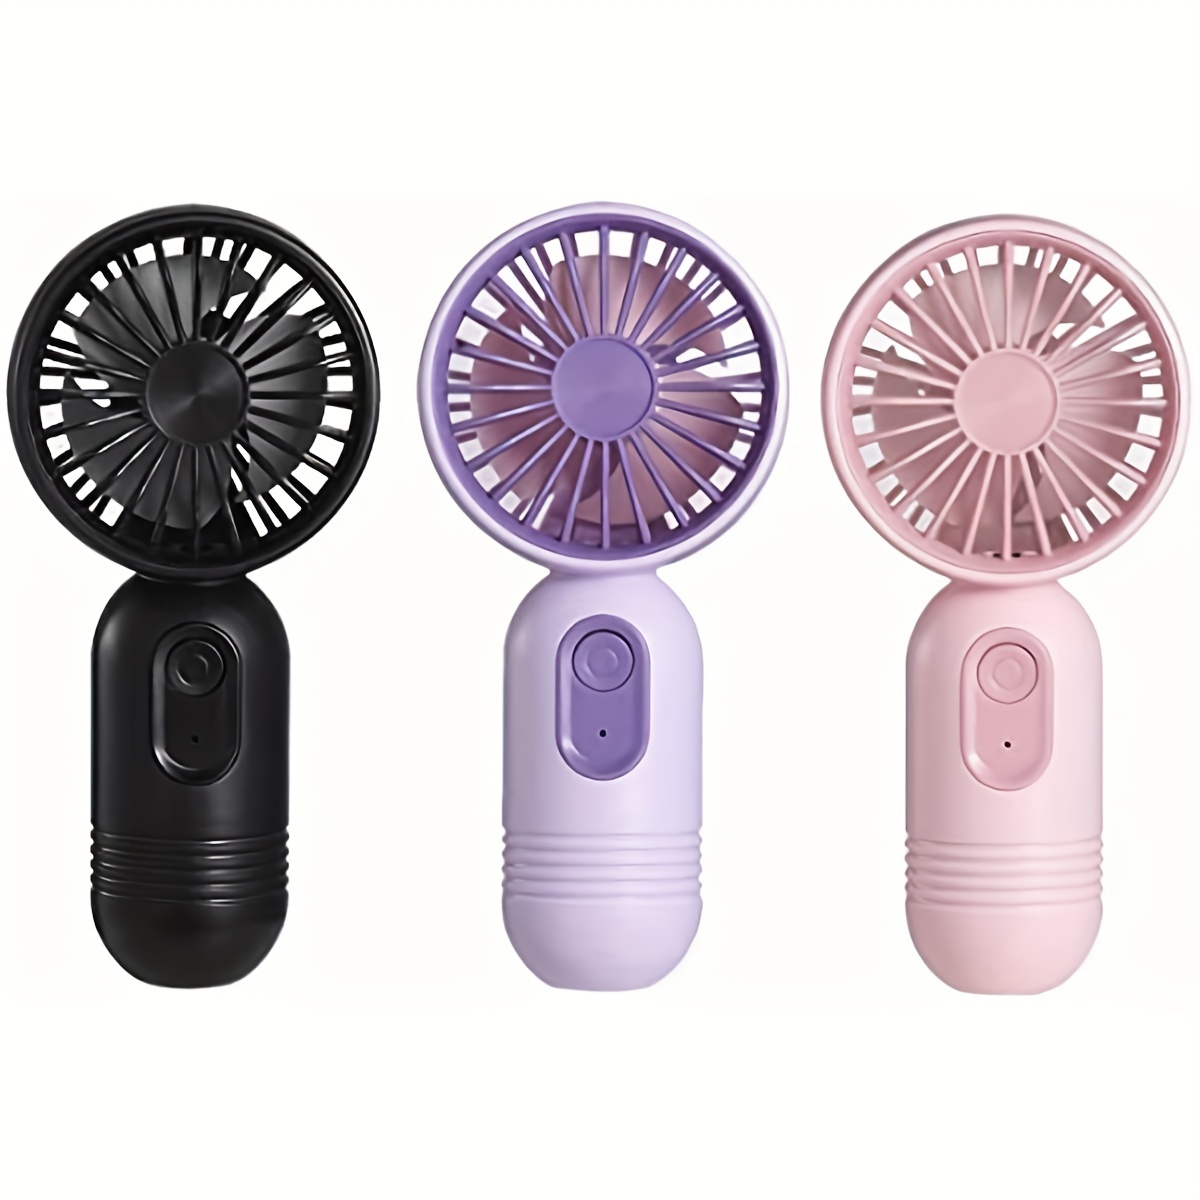 

Mini Portable Fan Cute Handheld Fan Battery Operated Lightweight Small Personal Fan With 3 Speeds And Usb Rechargeable Eyelash Fan For Stylish Girl Kids Women Men Office Outdoor Travel Camping